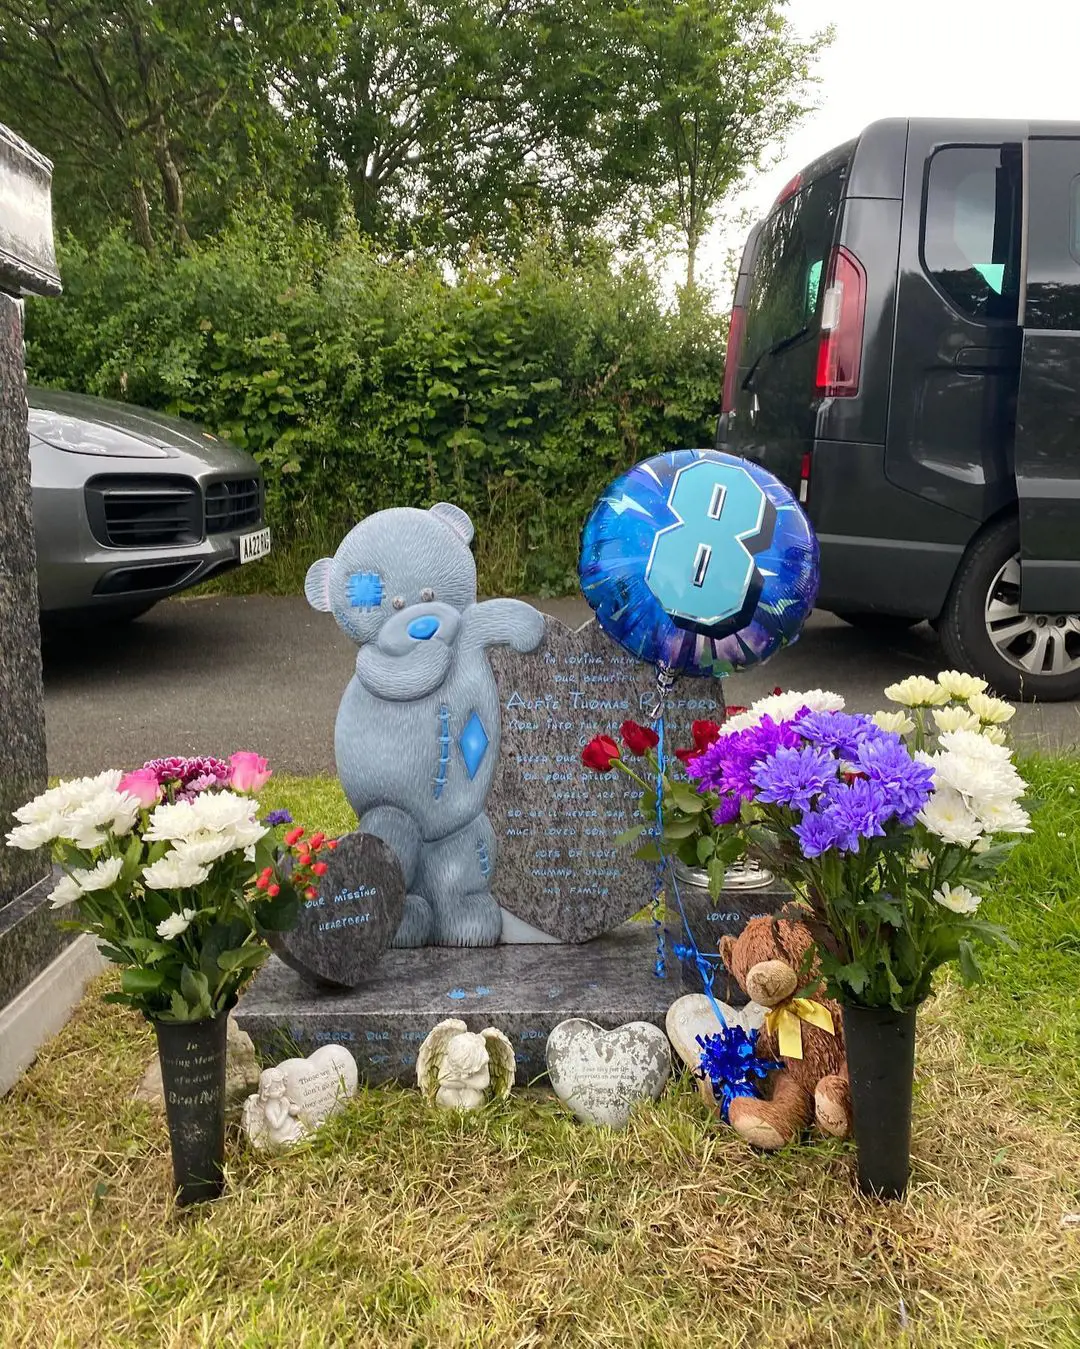 The family wished Alfie on his 8th Heavenly birthday in July 2022.